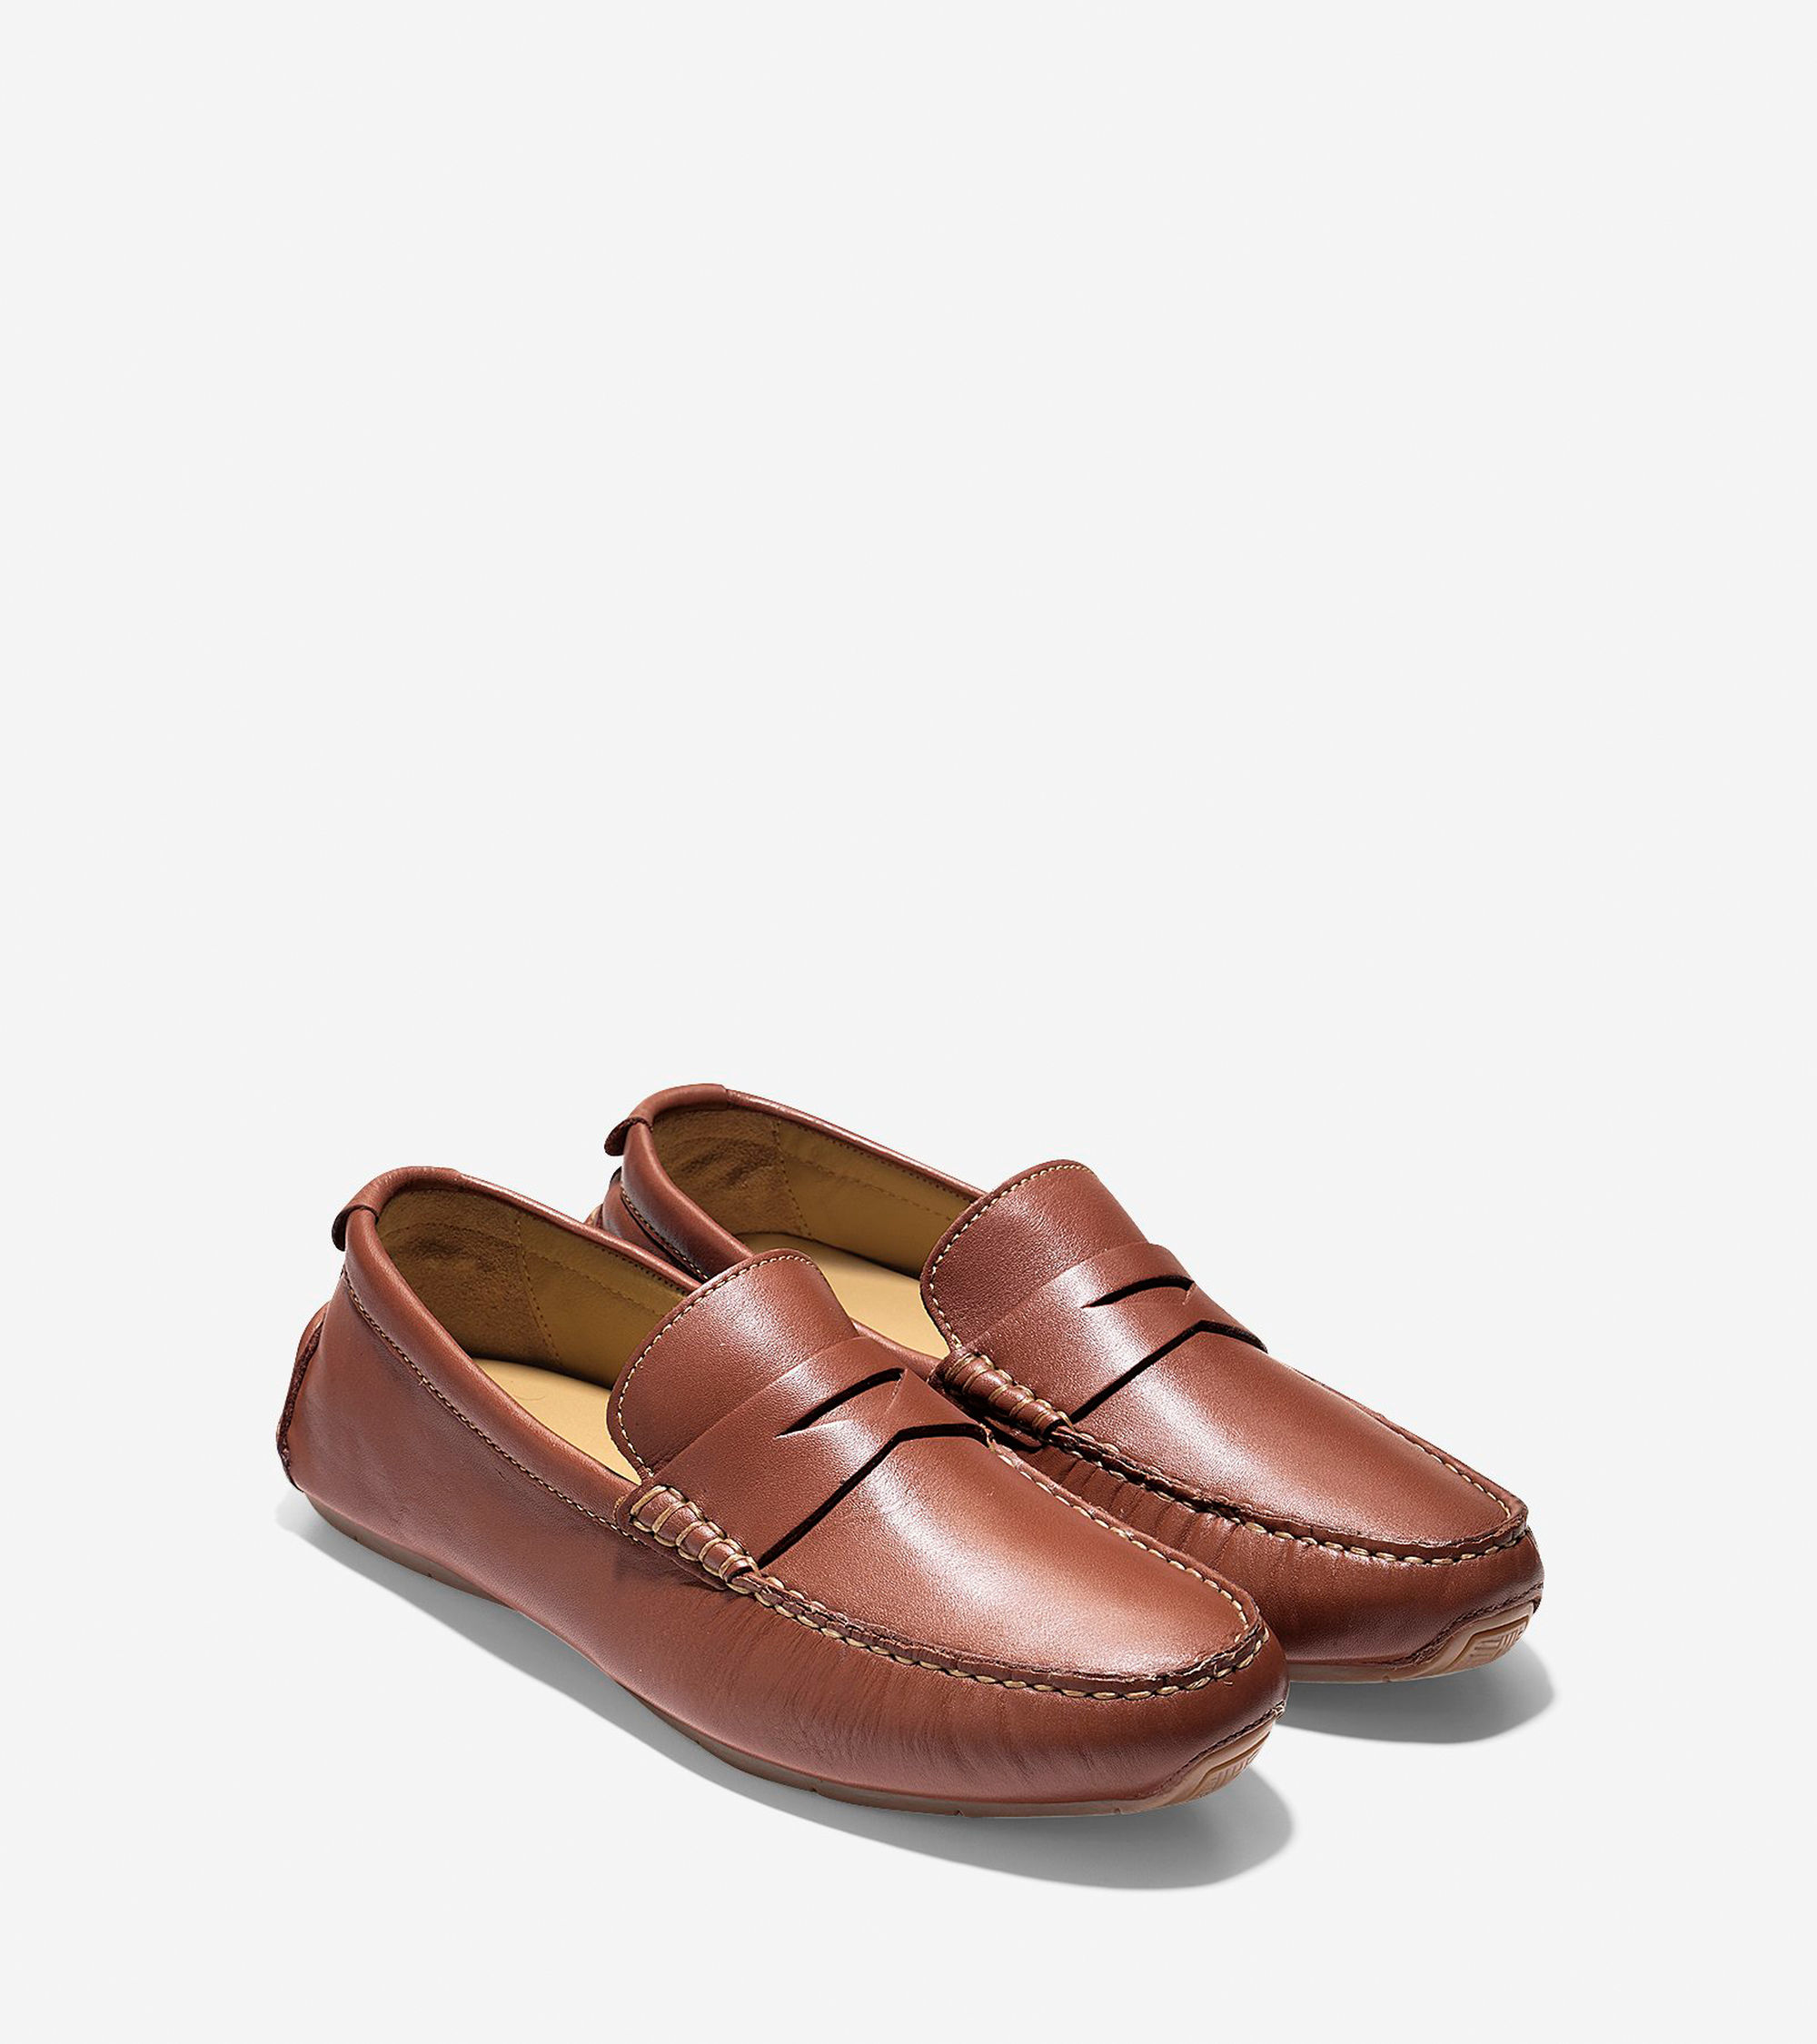 Lyst - Cole Haan Somerset Penny Loafer in Brown for Men